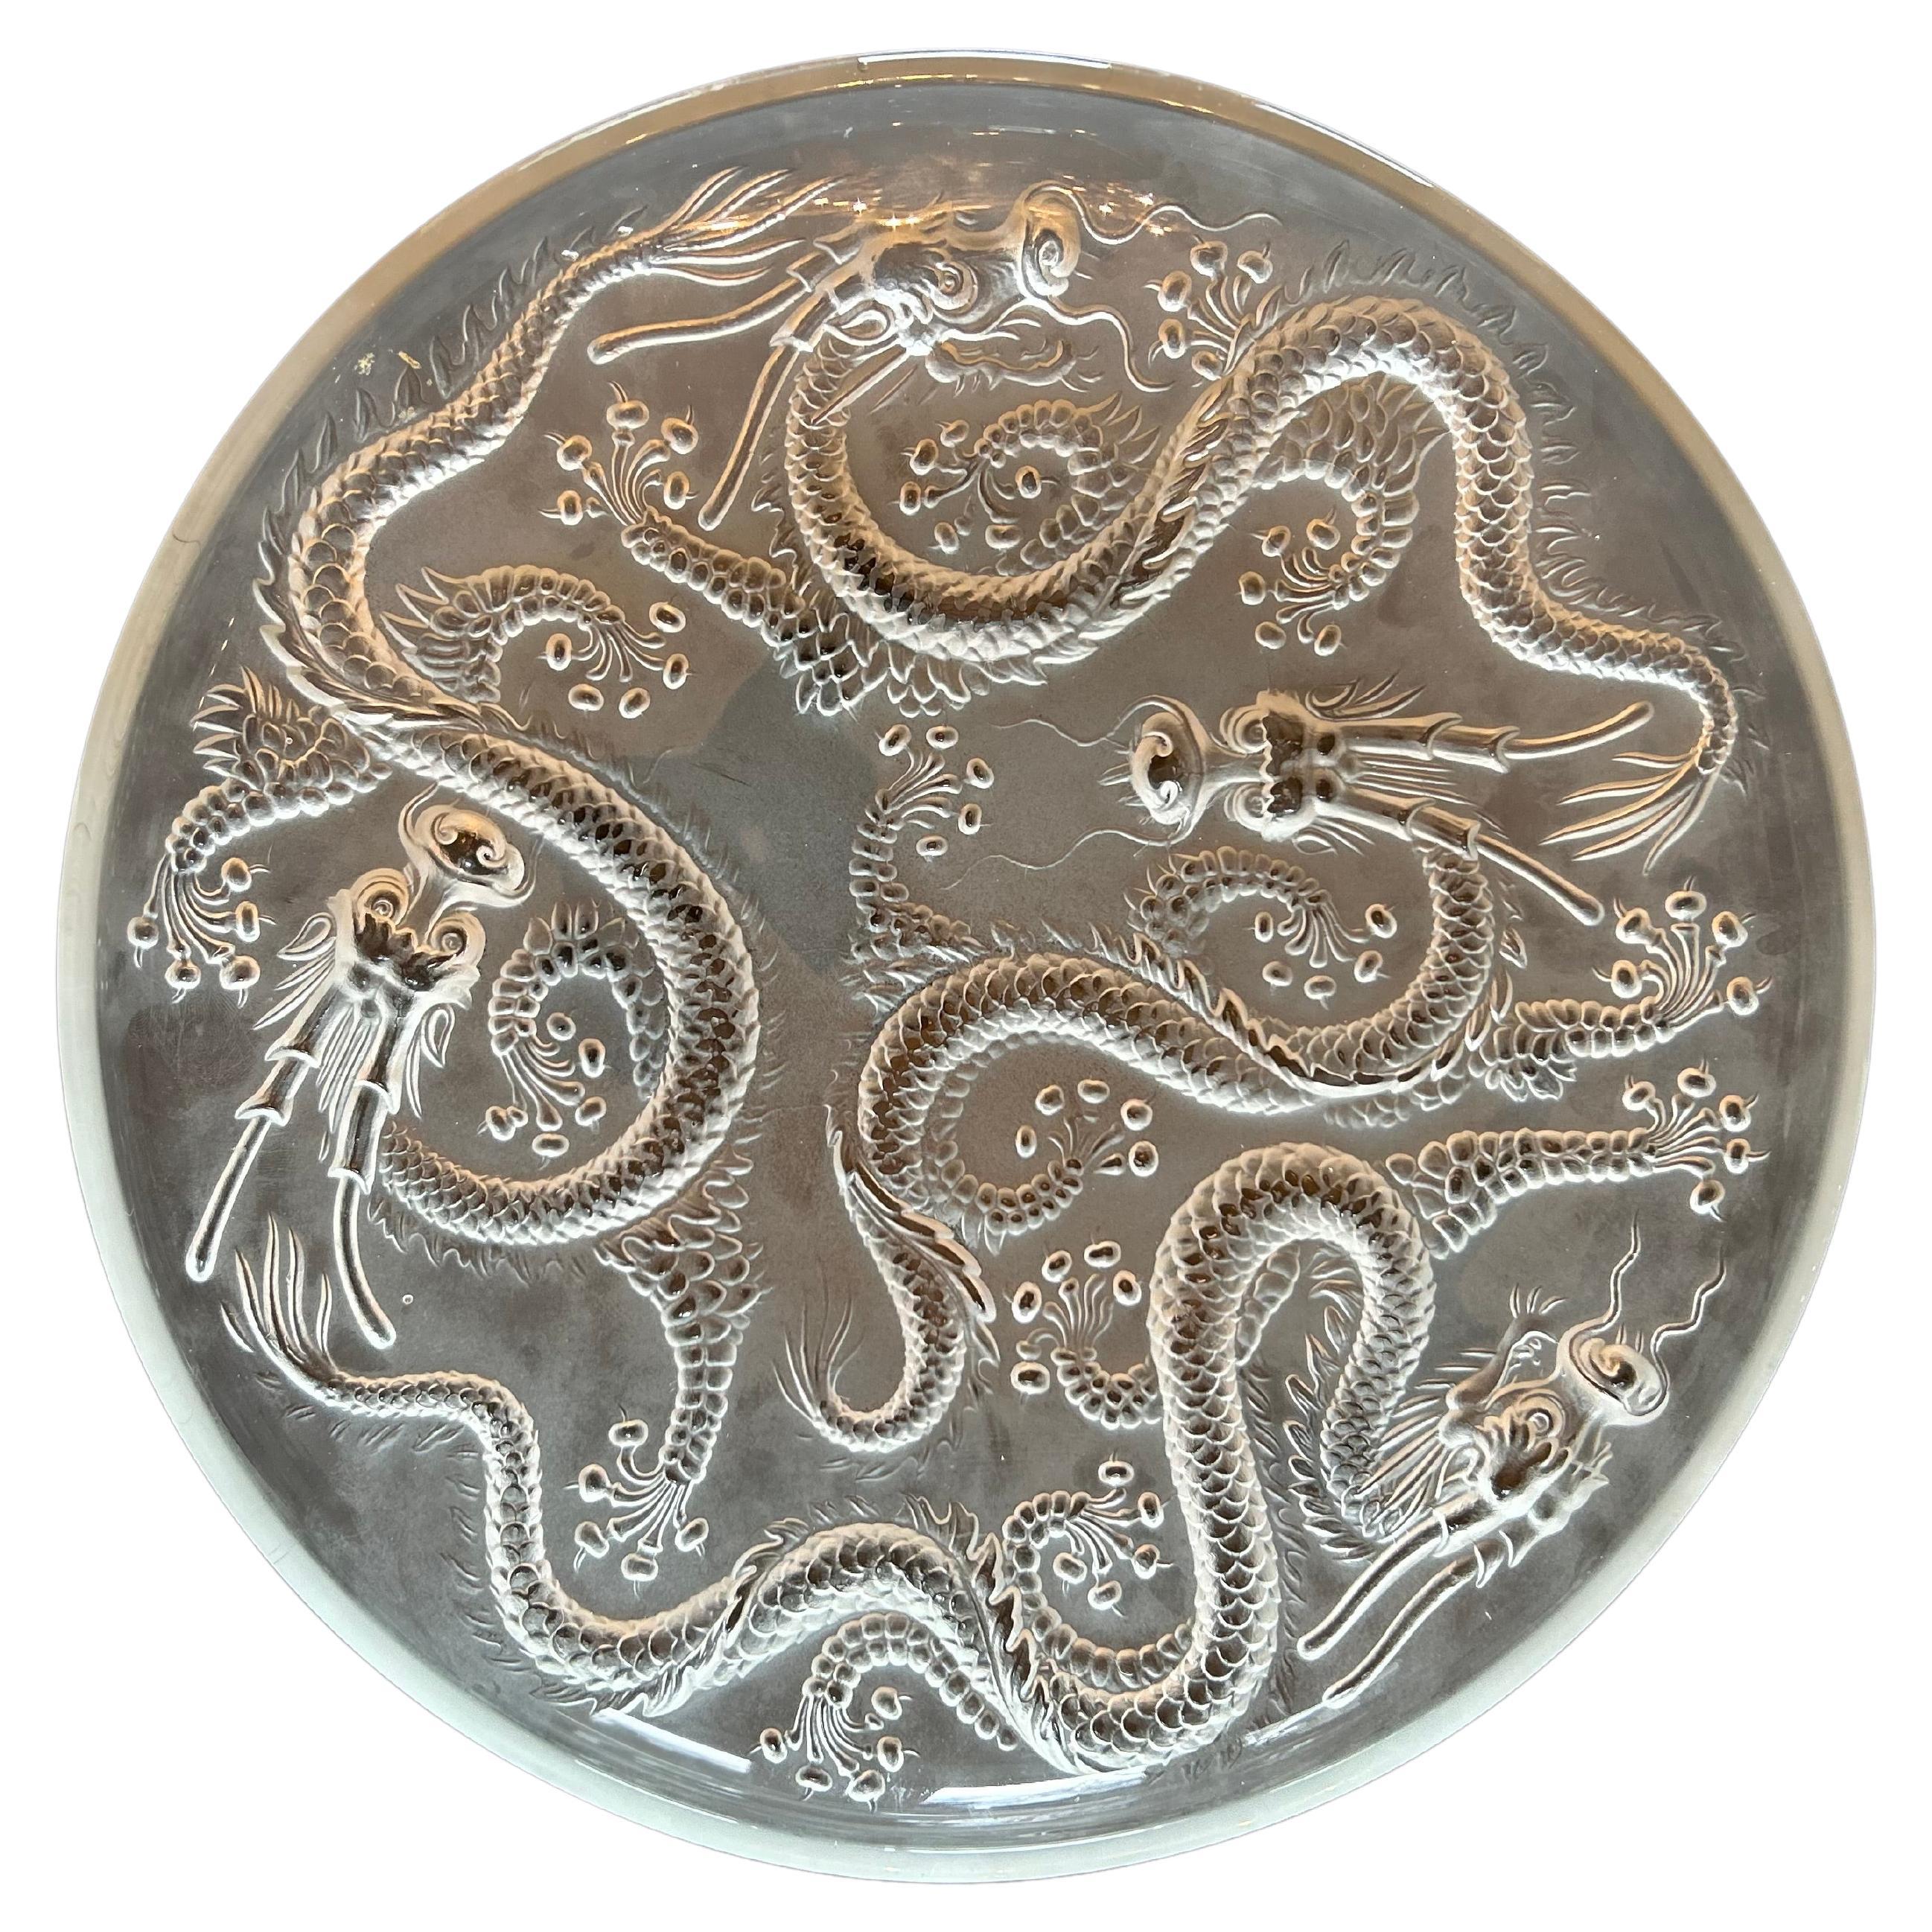 Large Frosted Glass Bowl With Dragons by Josef Inwald for Barolac, 1930 For Sale